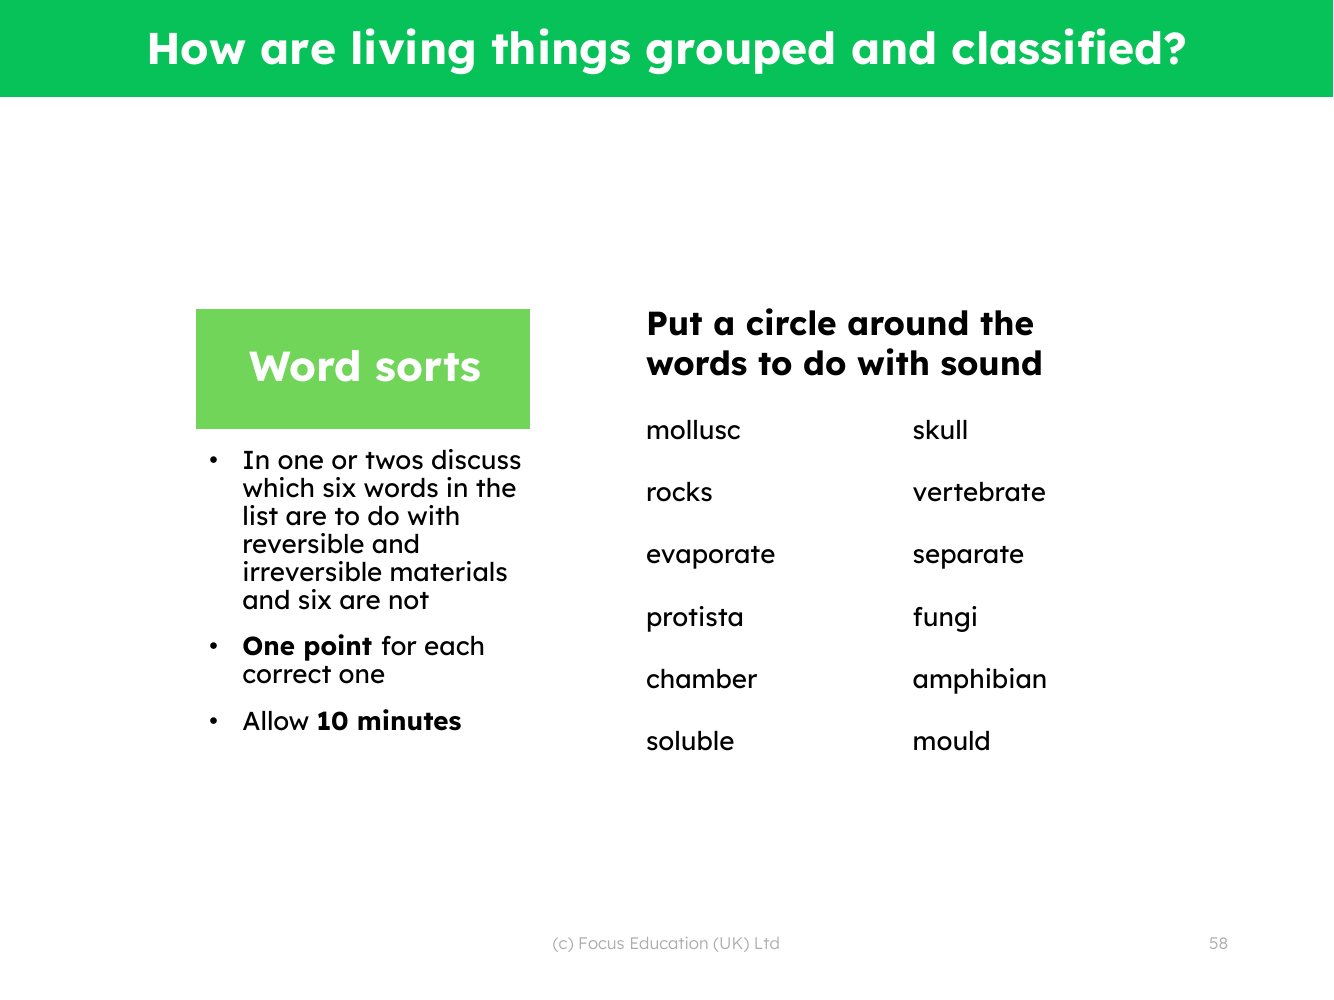 Word sorts - Classifying living things